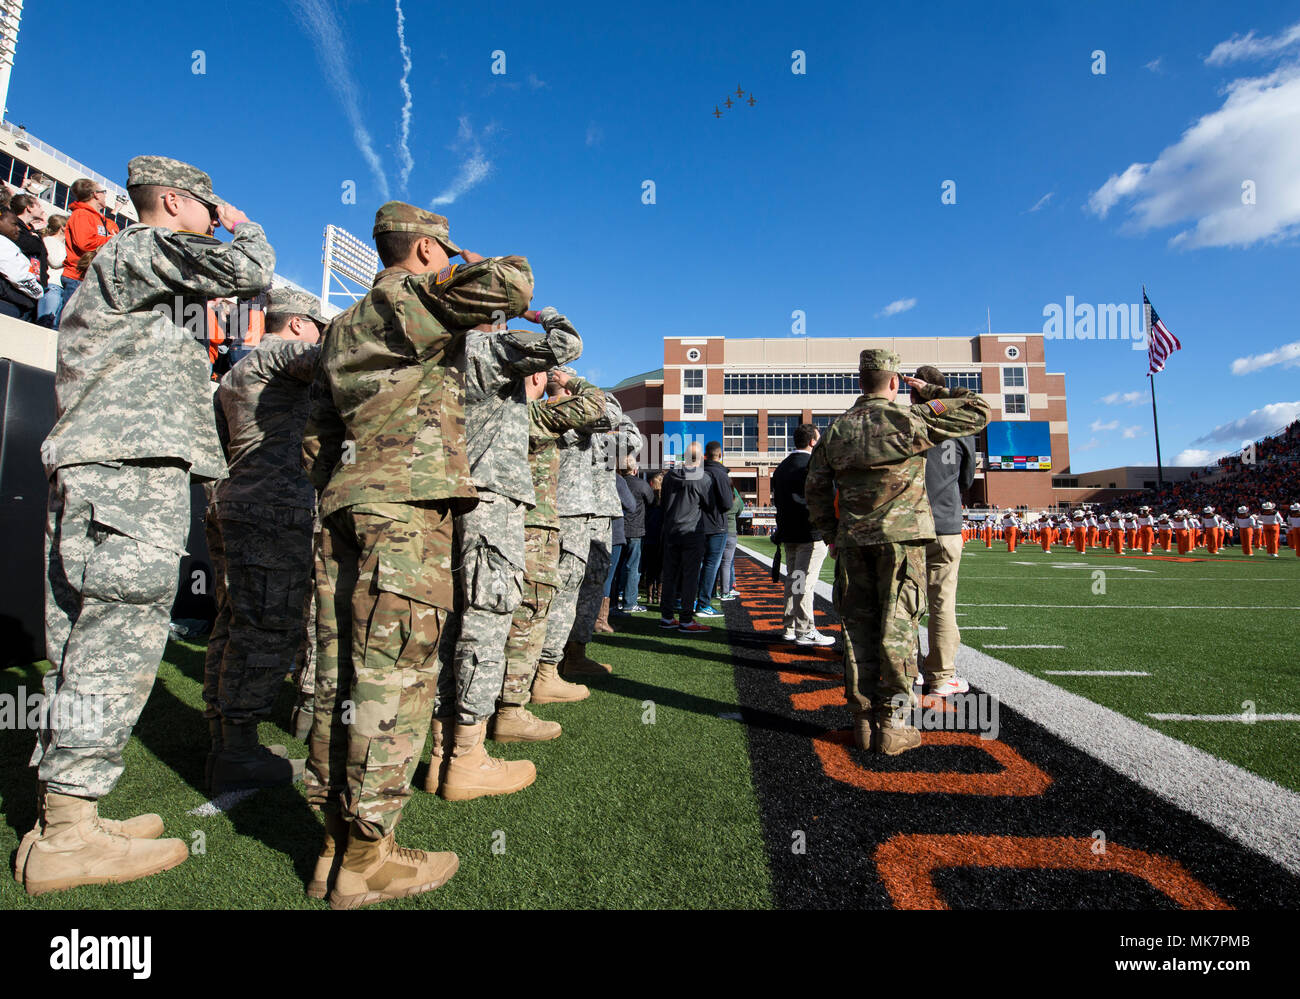 Members of the Army and Air Force ROTC Detachments at Oklahoma State University salute the American Flag during the National Anthem Nov. 18, 2017, at Boone Pickens Stadium, Oklahoma State University, Stillwater, Oklahoma. The Reserve Officers’ Training Corps program was formally created in 1916 and produces almost 30 percent of miltary officers each year. (U.S. Air Force photo by Airman Zachary Heal) Stock Photo